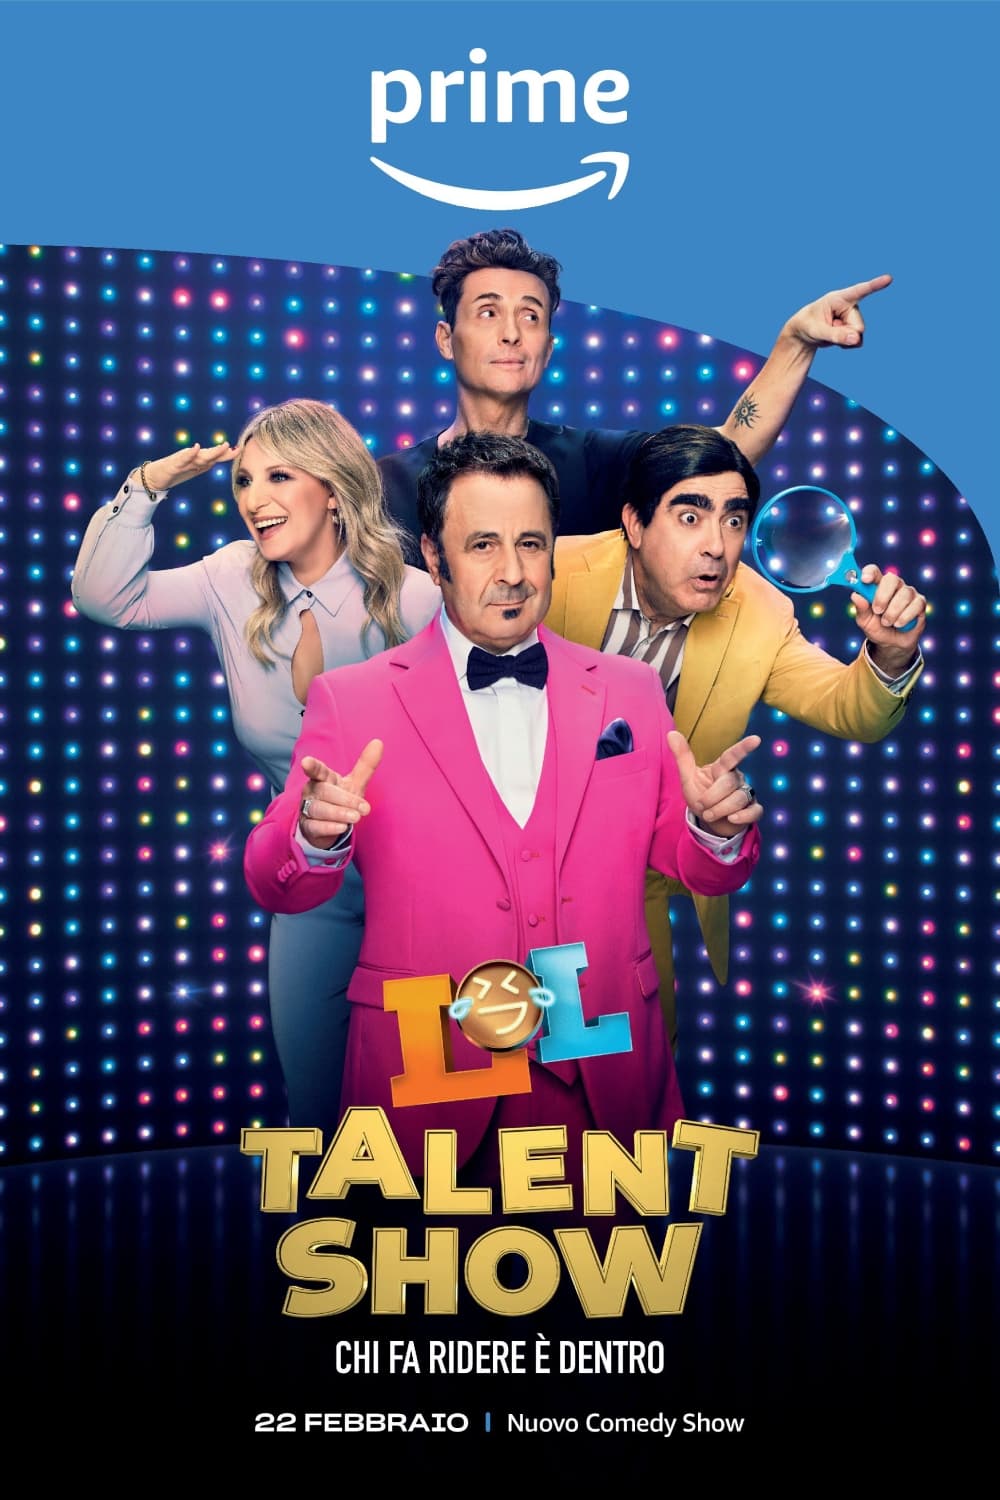 LOL Talent Show: Be Funny and You're in!